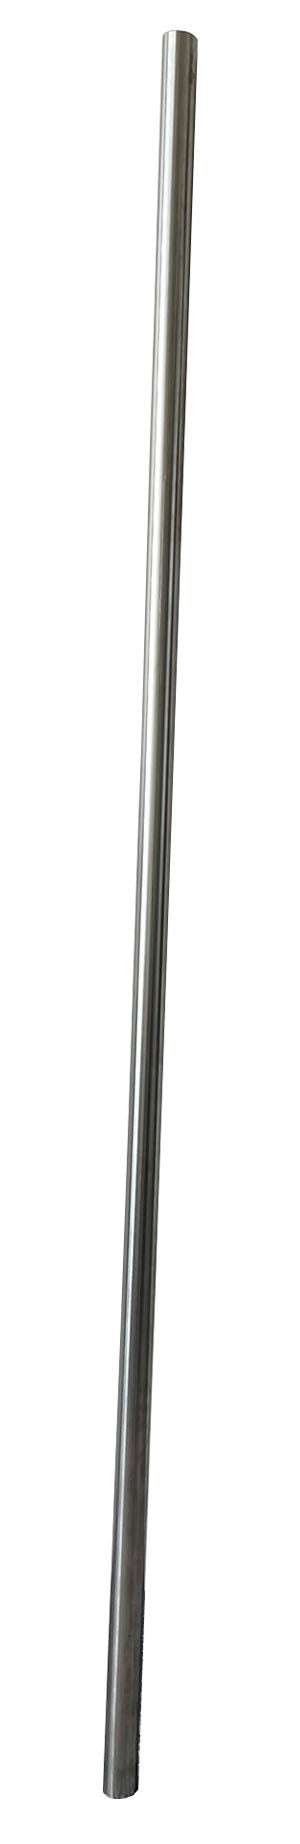 Omega Stainless Steel 6 feet Pole for End-Bar and Center Bar Support